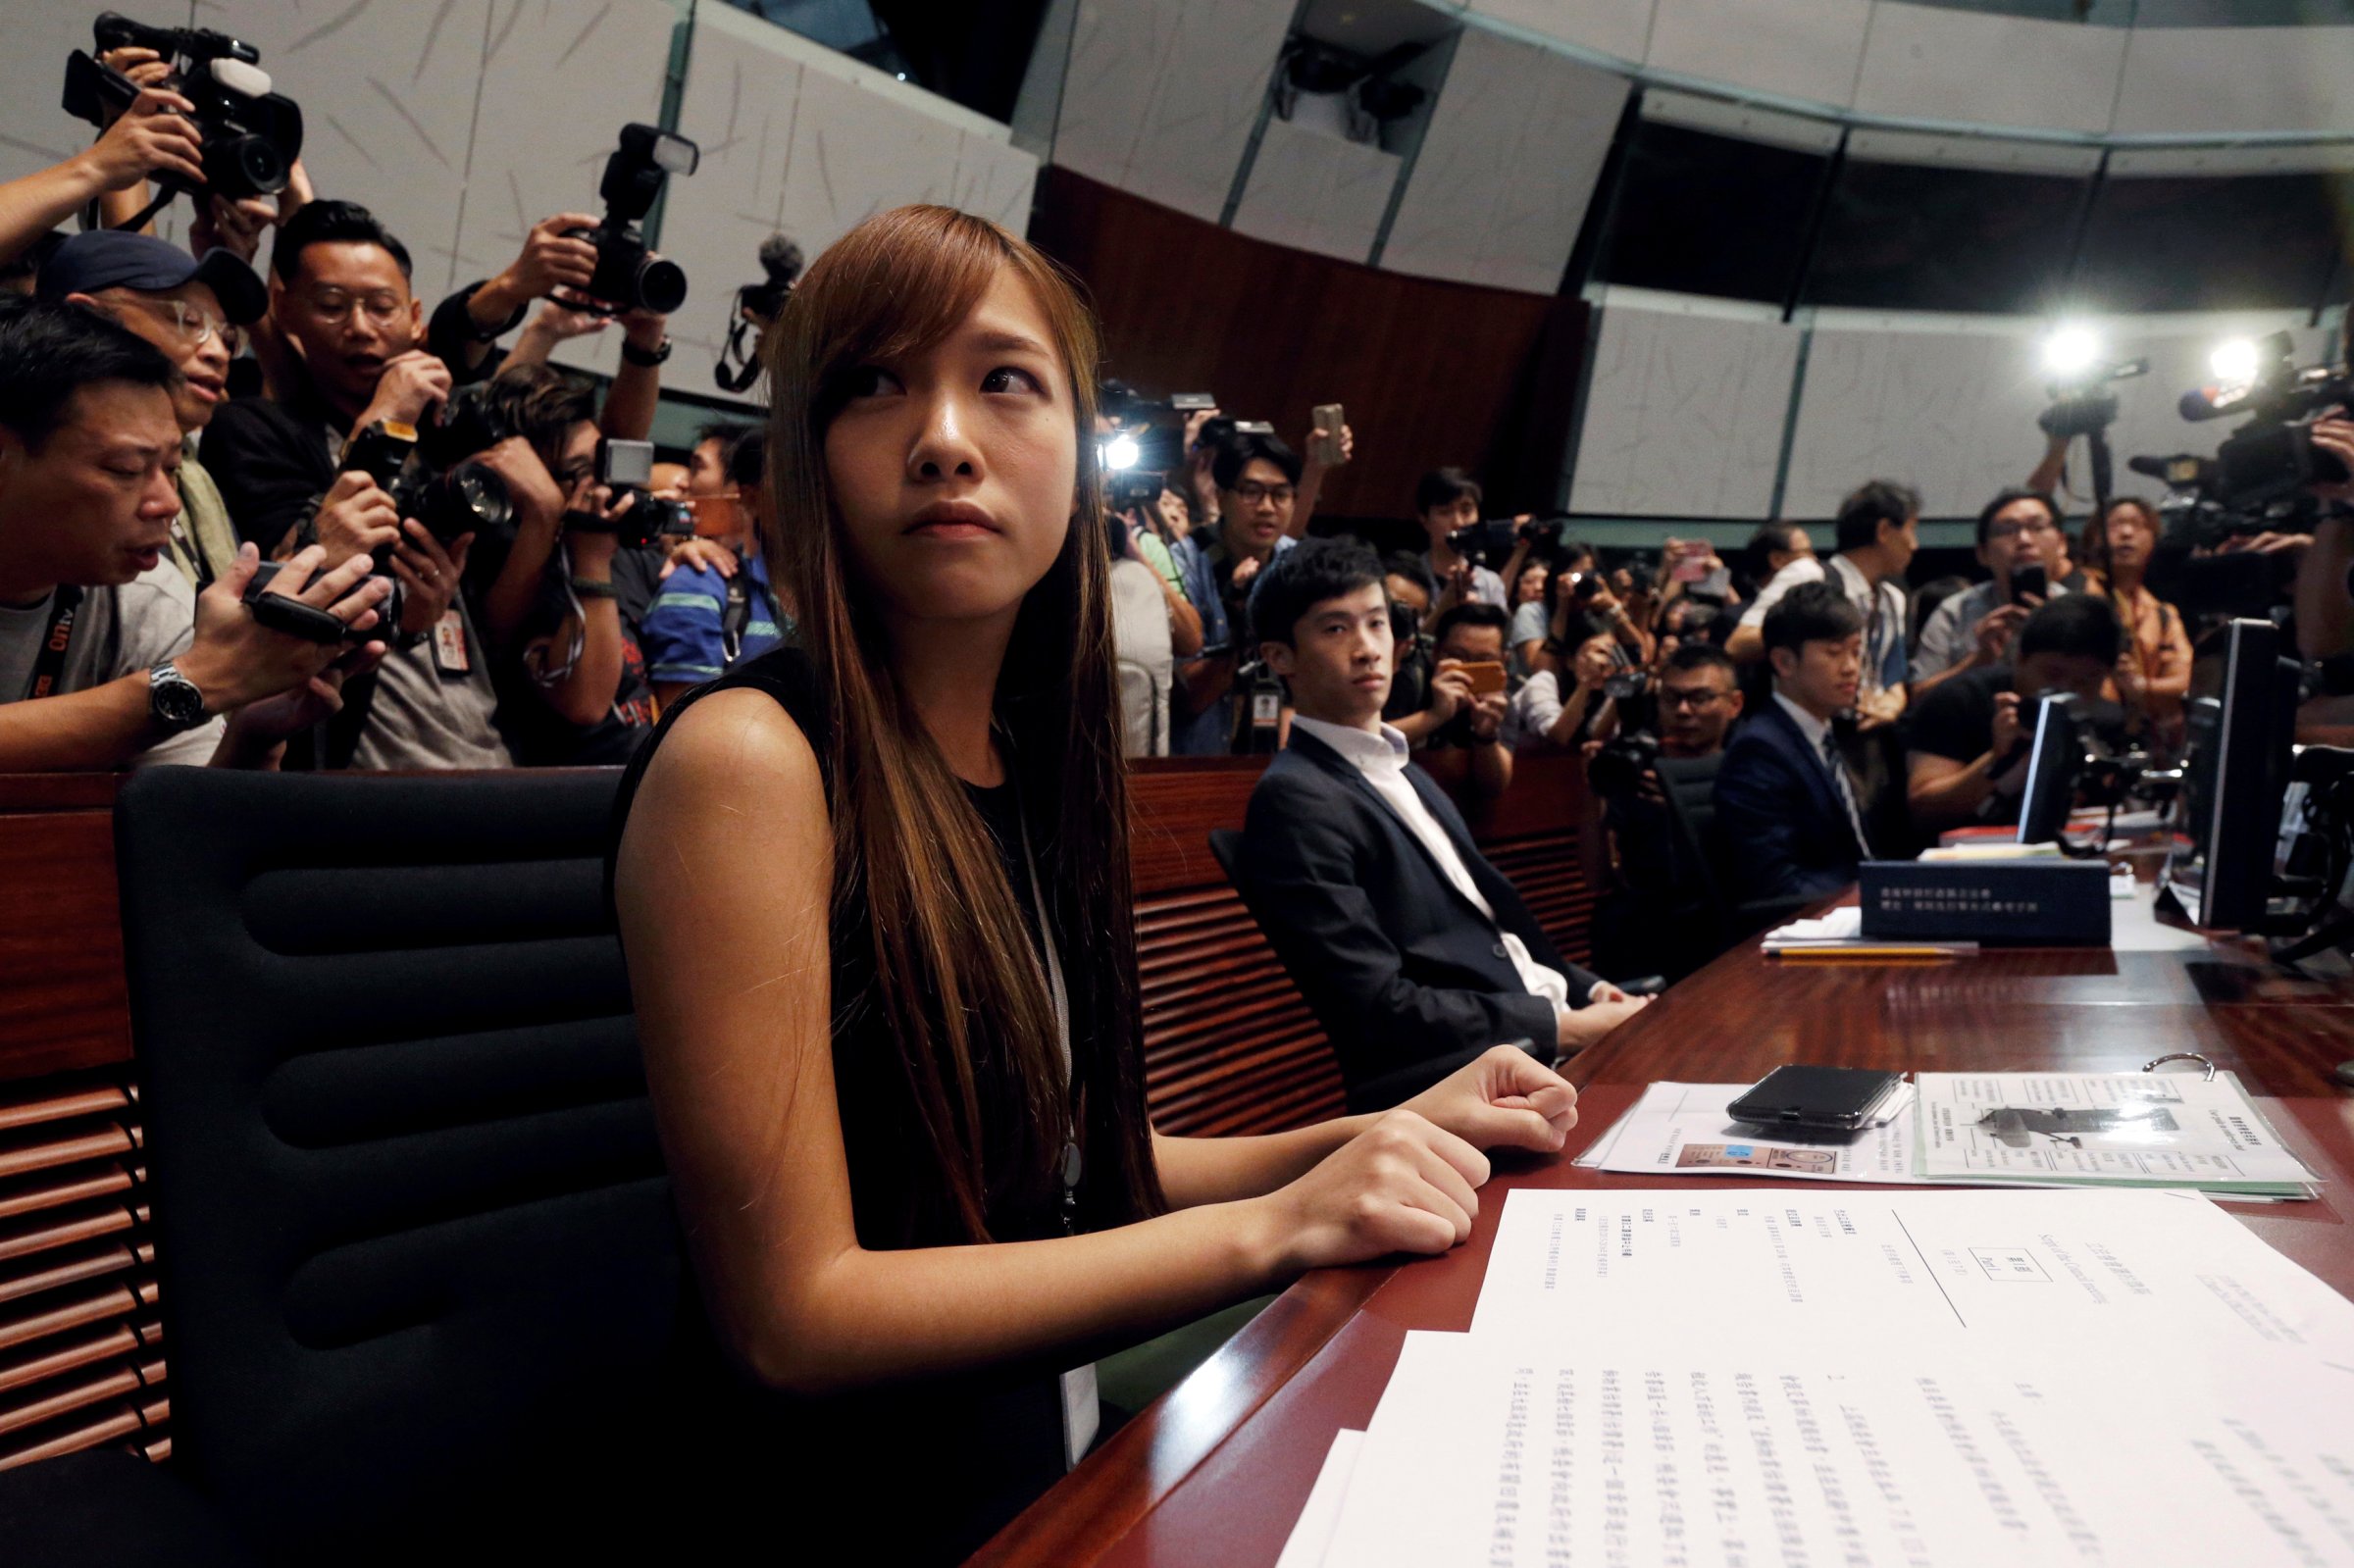 Pro-independence lawmakers Yau Wai-ching (L) and Baggio Leung sit during a demonstration at the Legislative Council in Hong Kong